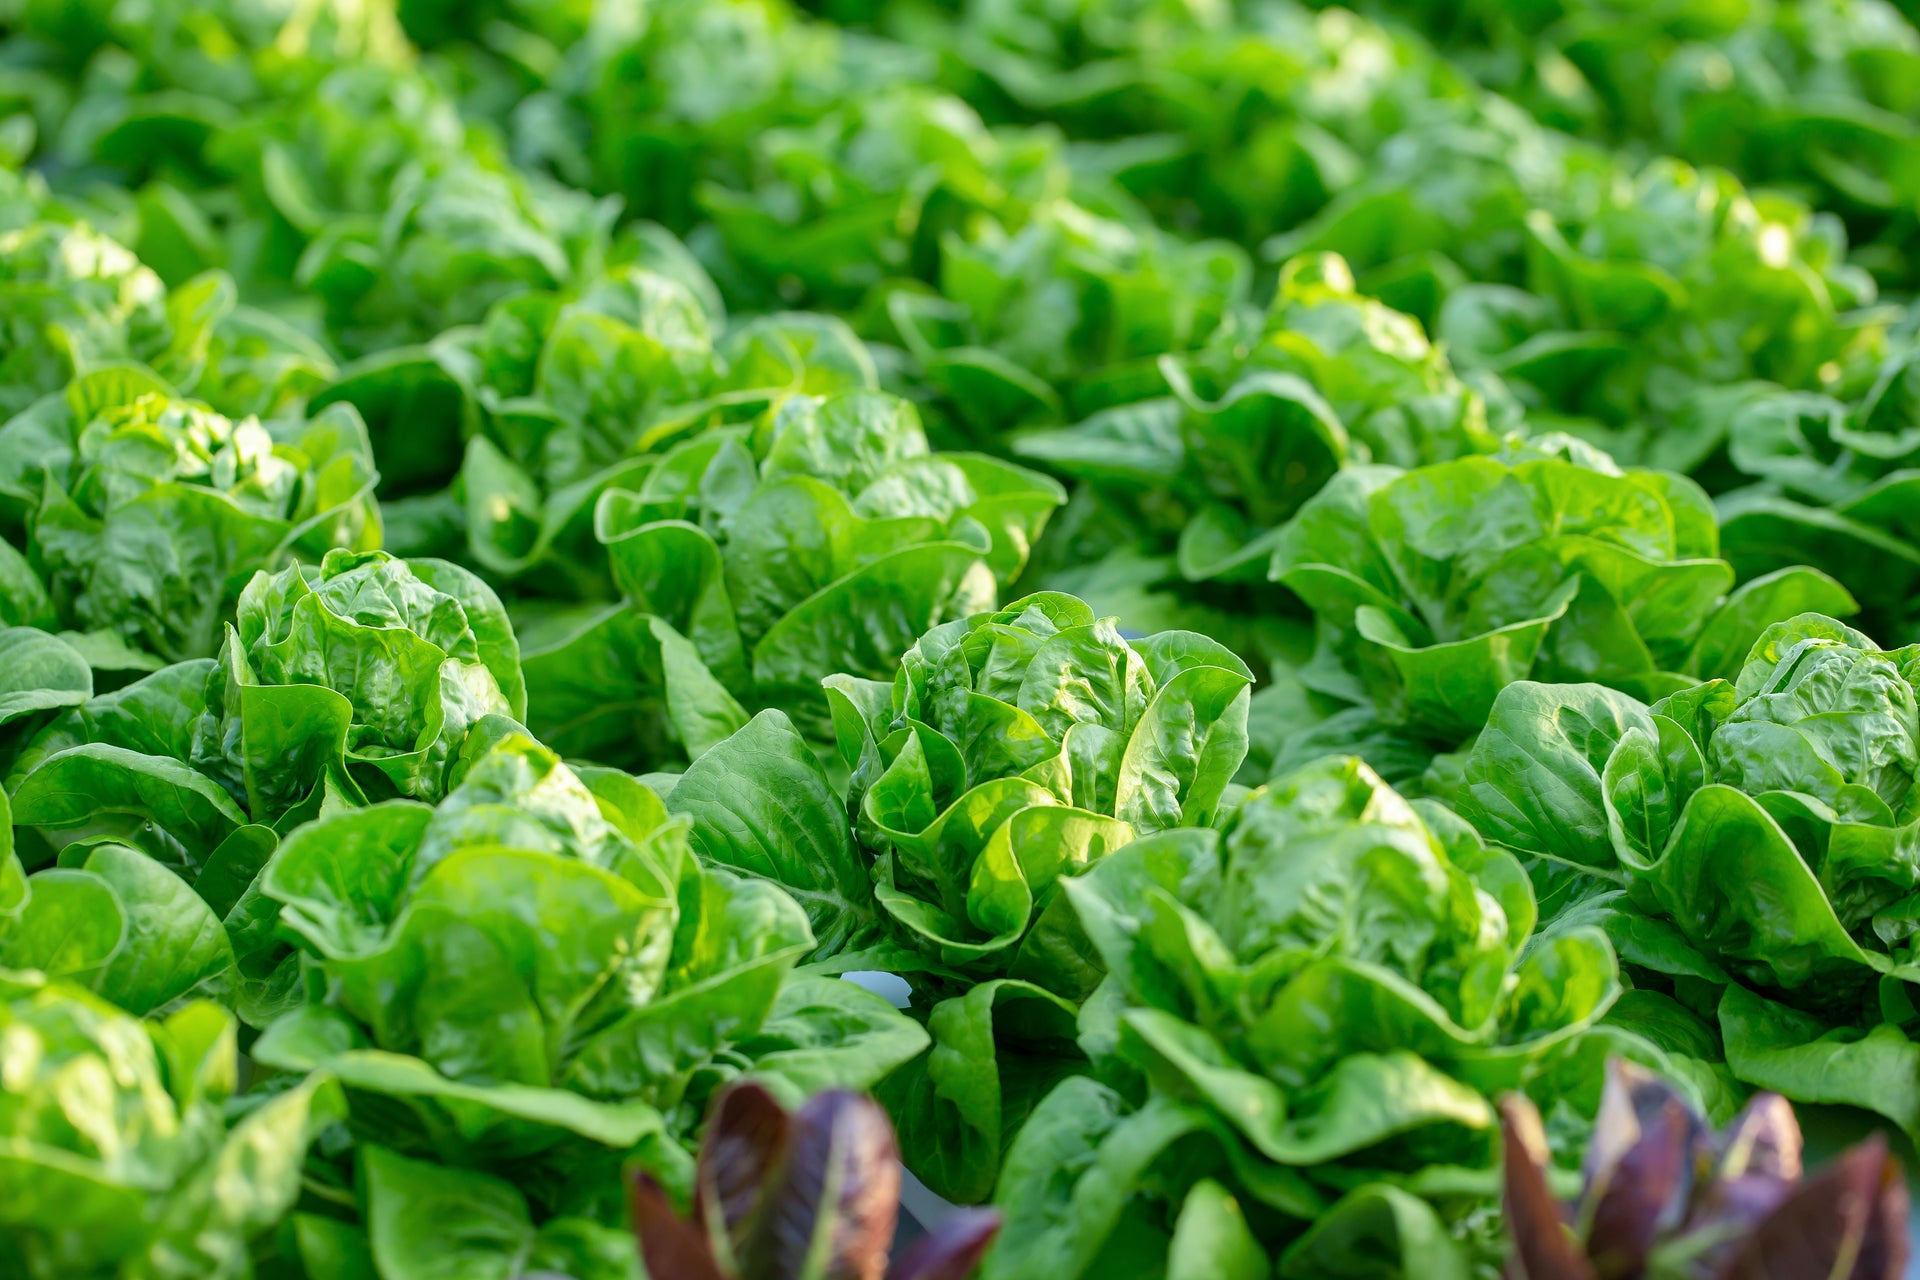 Grow lettuce from seed all year round with these growing tips.